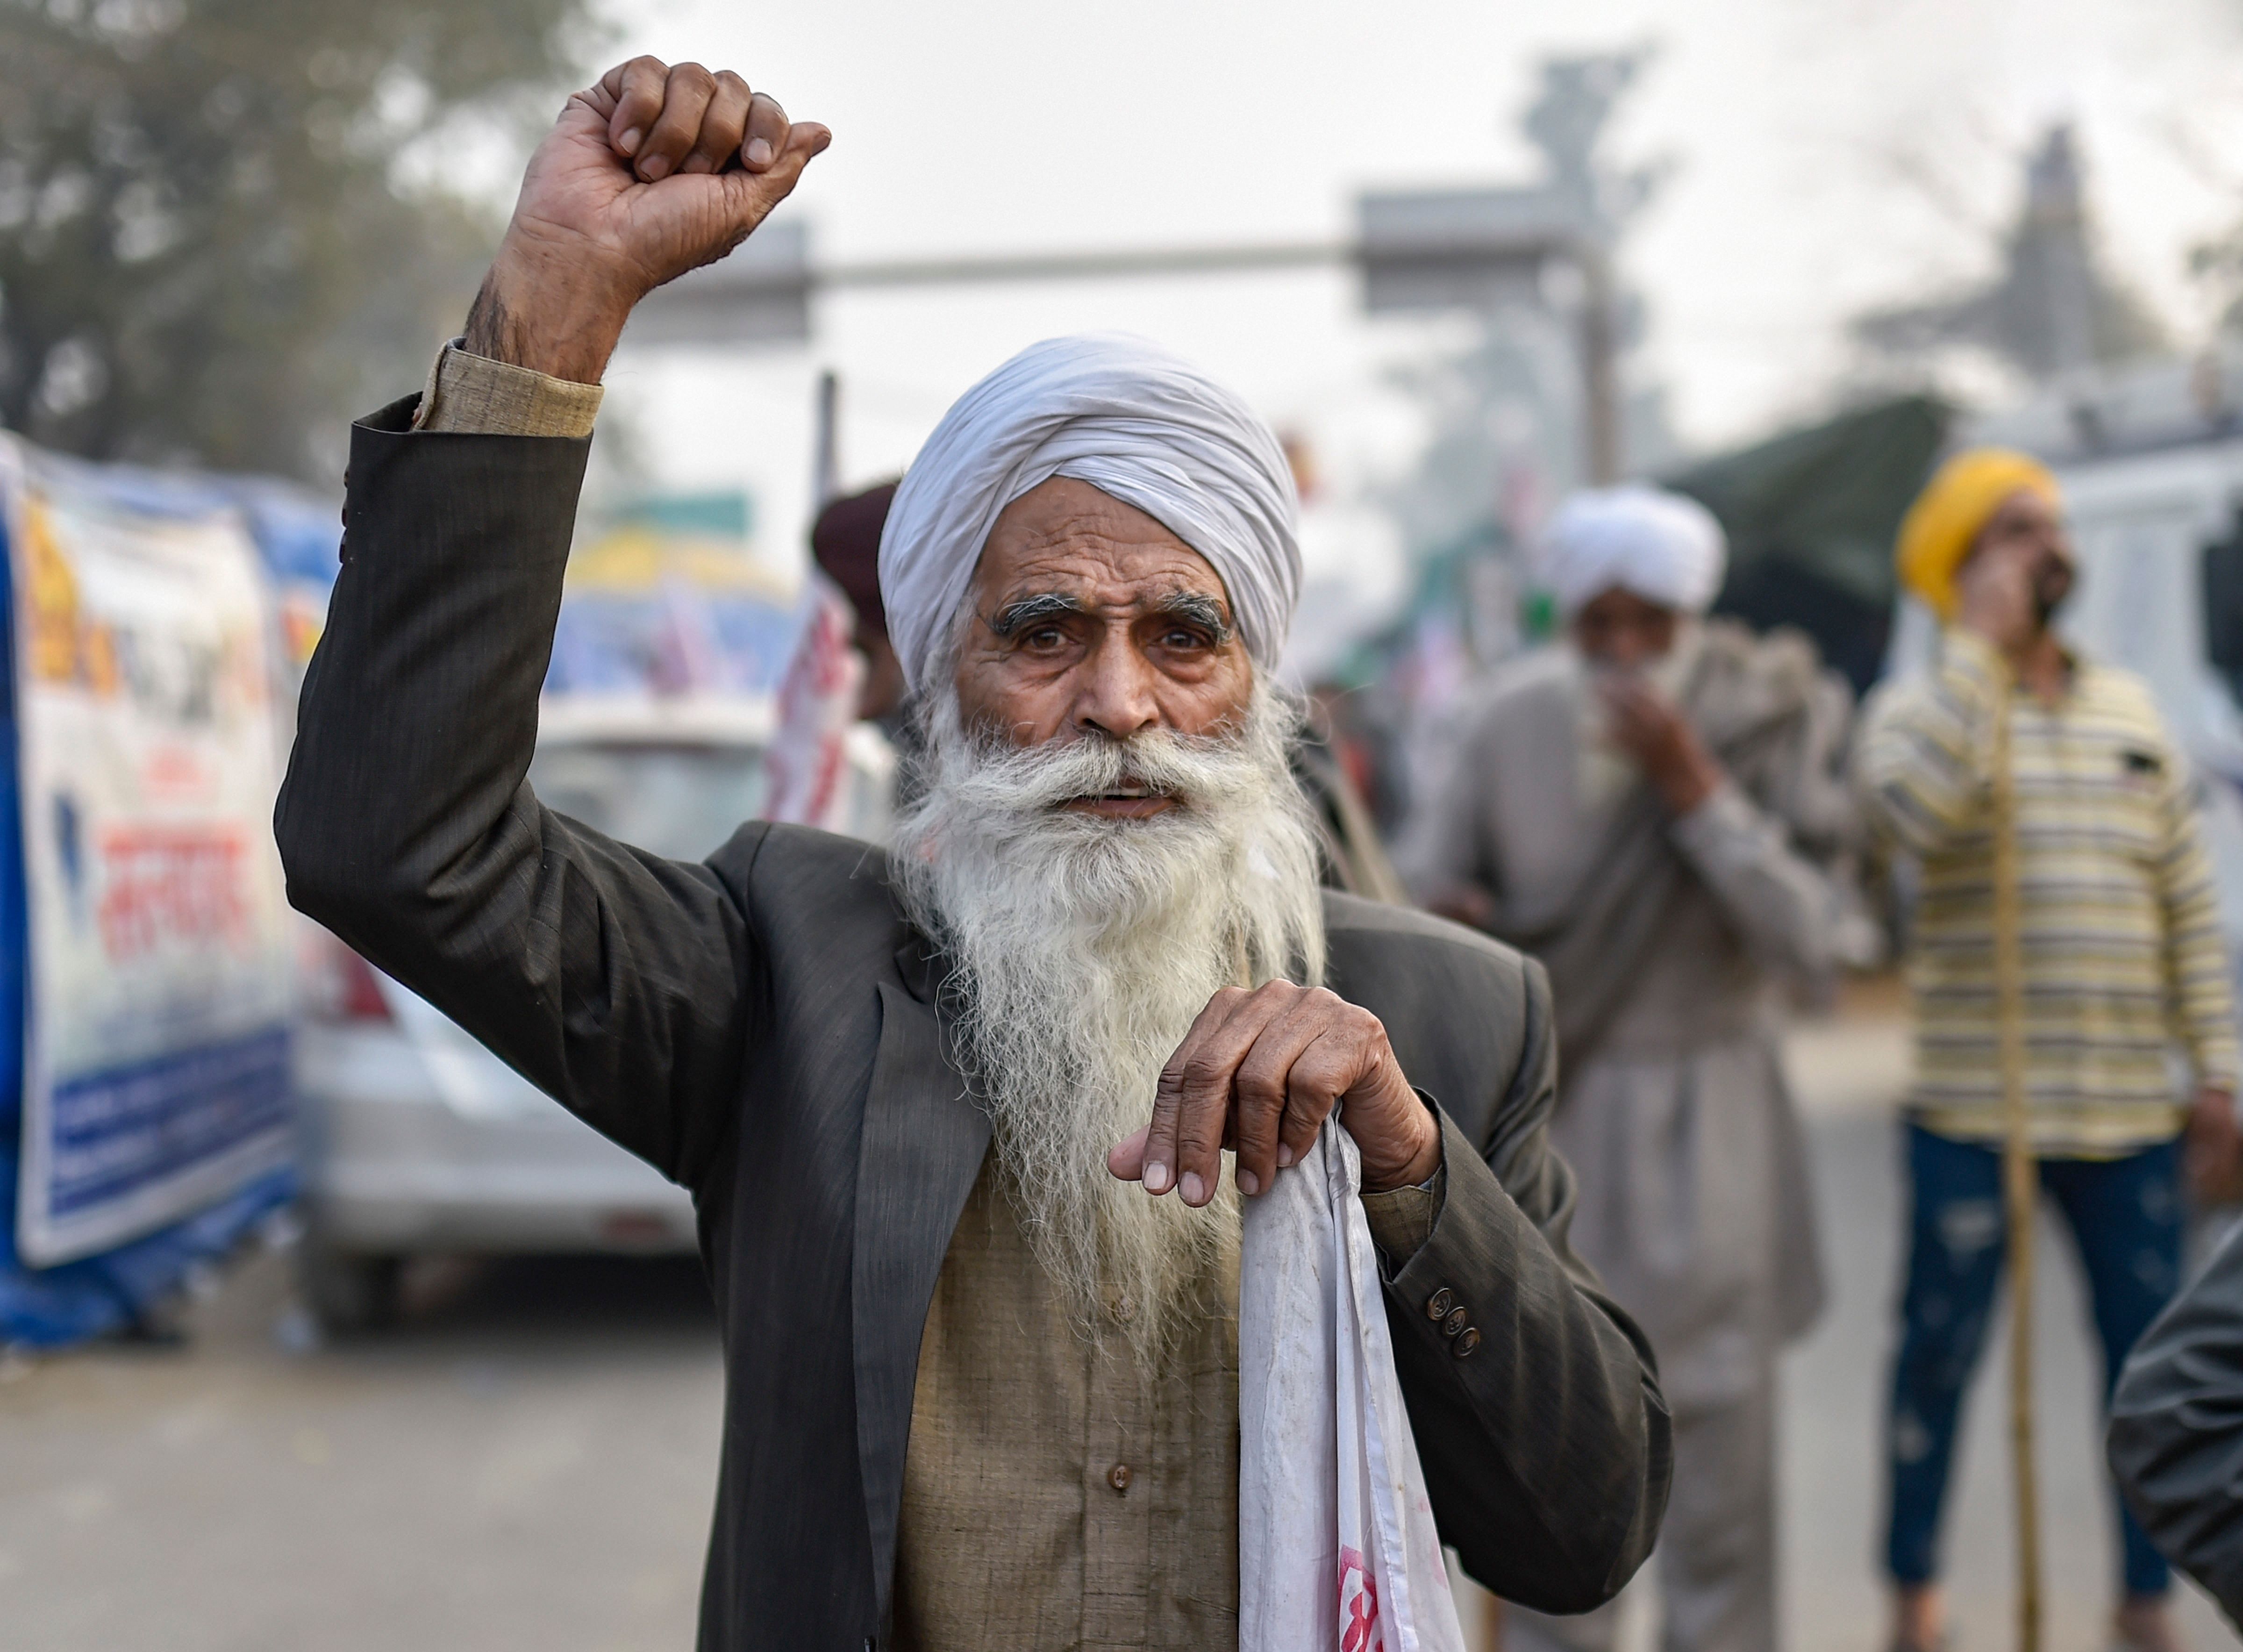  A Sikh farmers shouts slogans during the ongoing agitation against the new farm laws, at Singhu border. Credit: PTI Photo